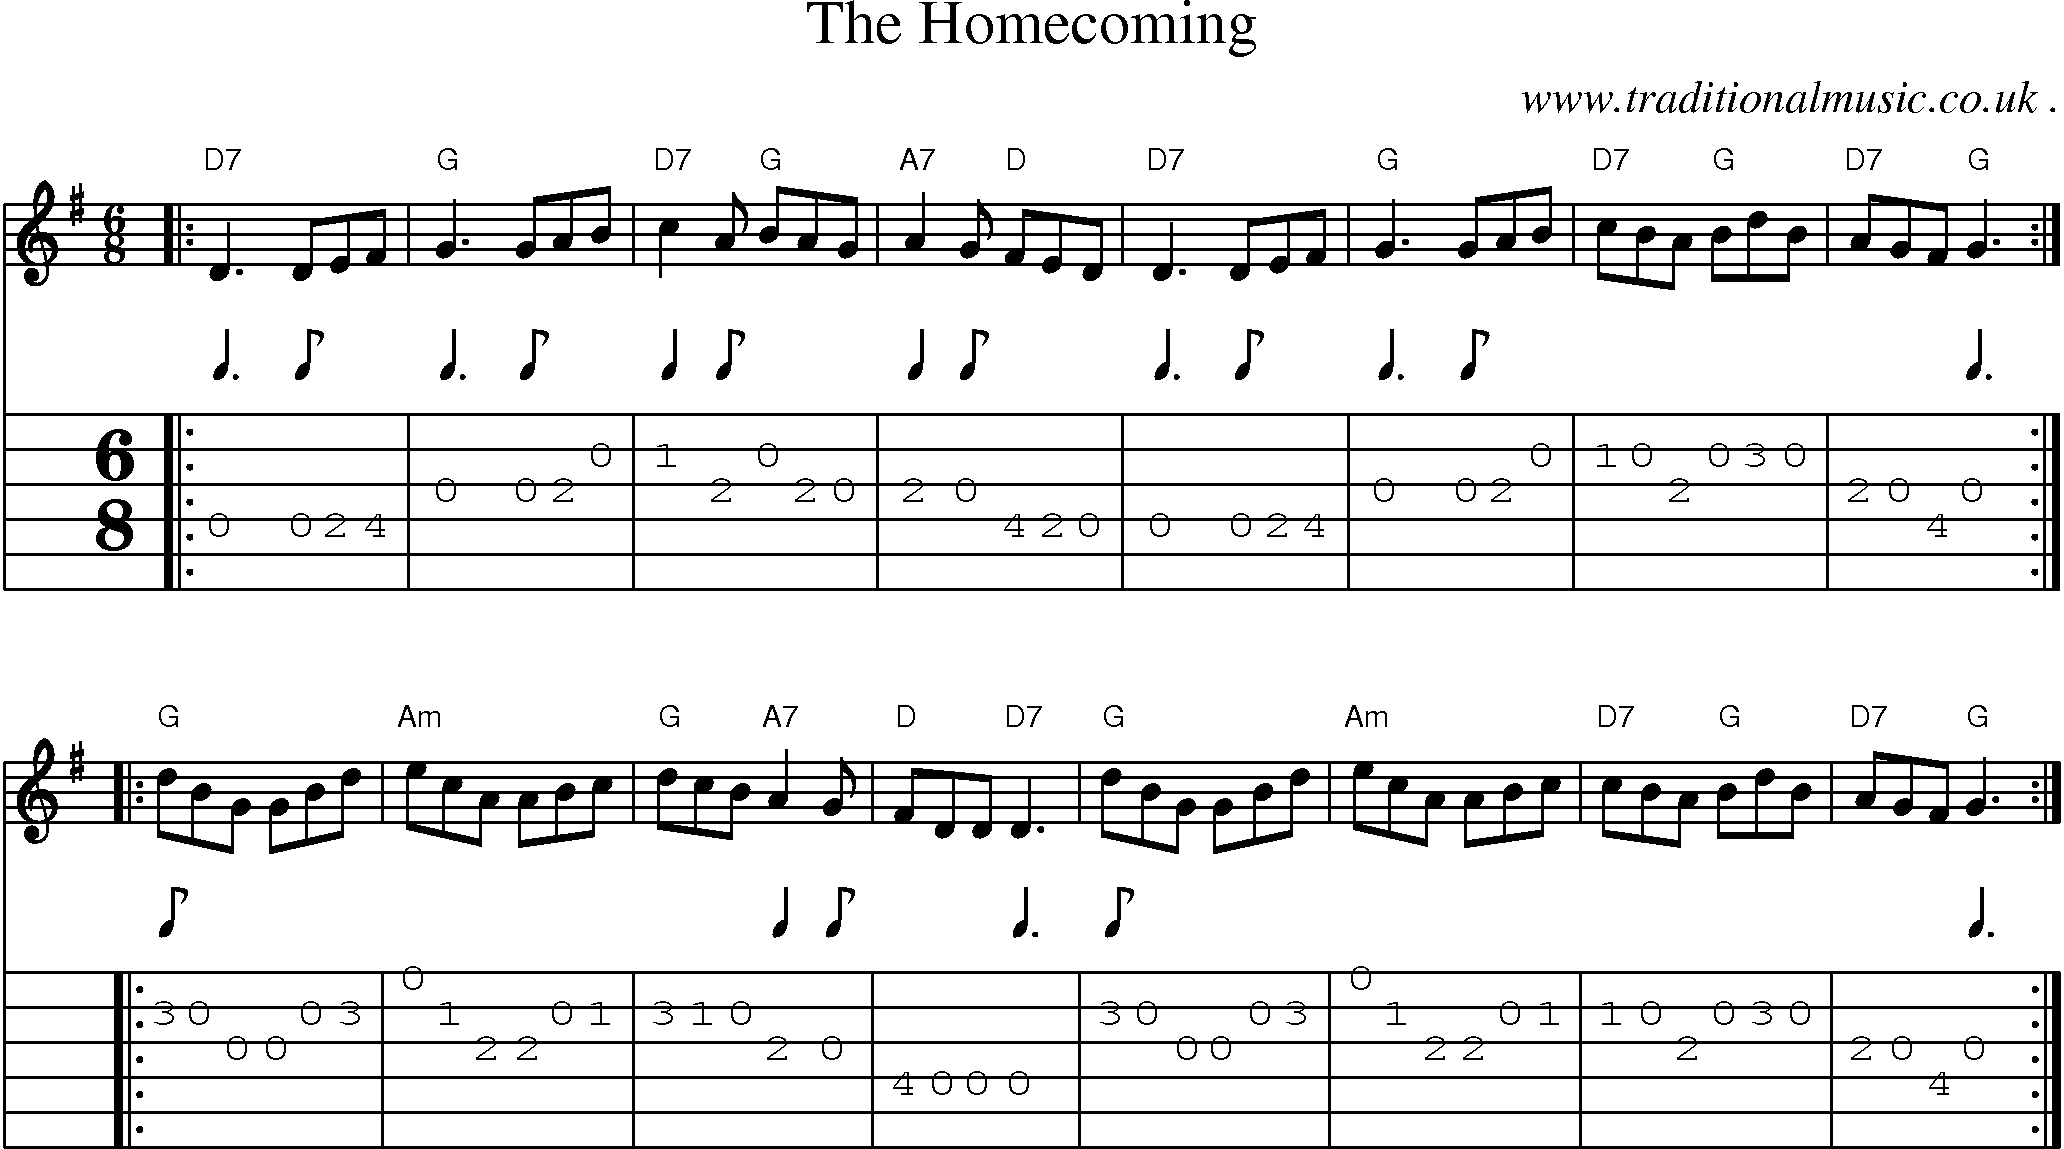 Sheet-music  score, Chords and Guitar Tabs for The Homecoming